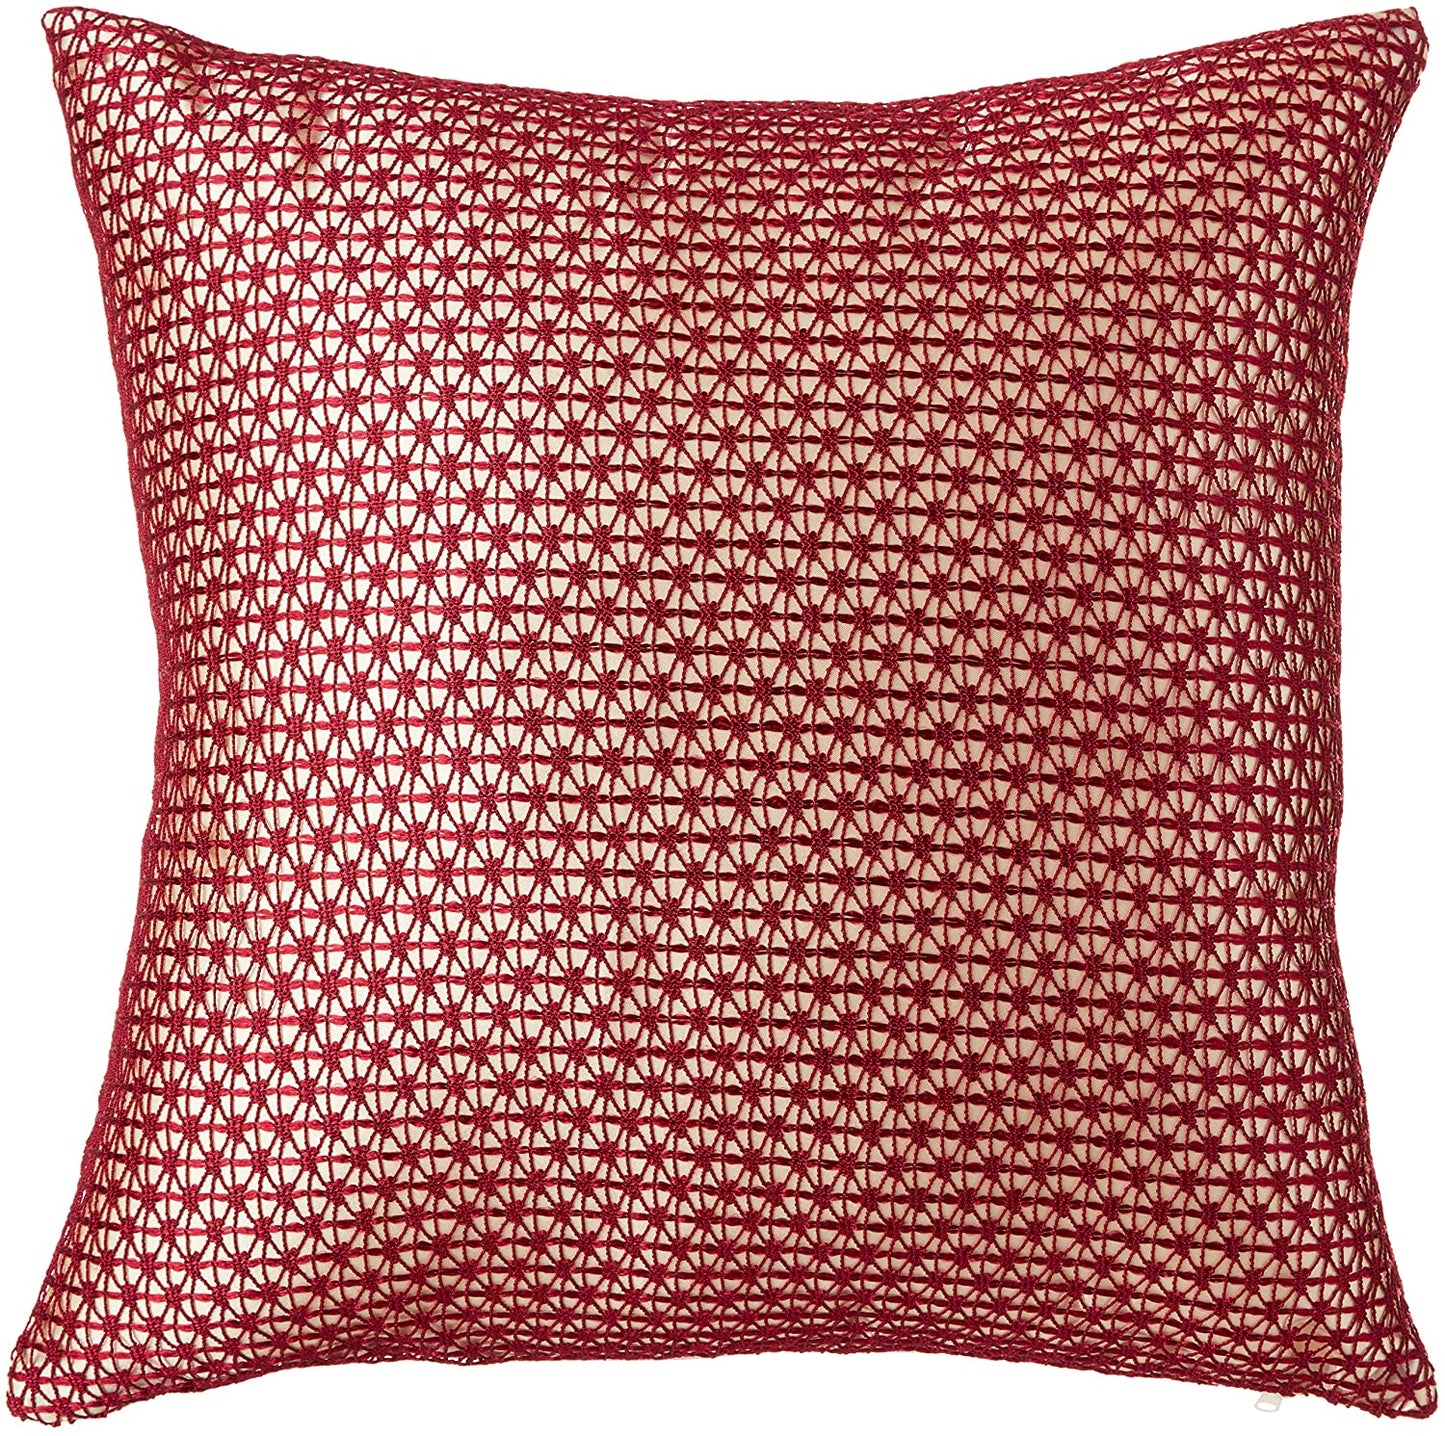 Marvelous Geometric Lace Pattern Decorative Throw Pillow Cover